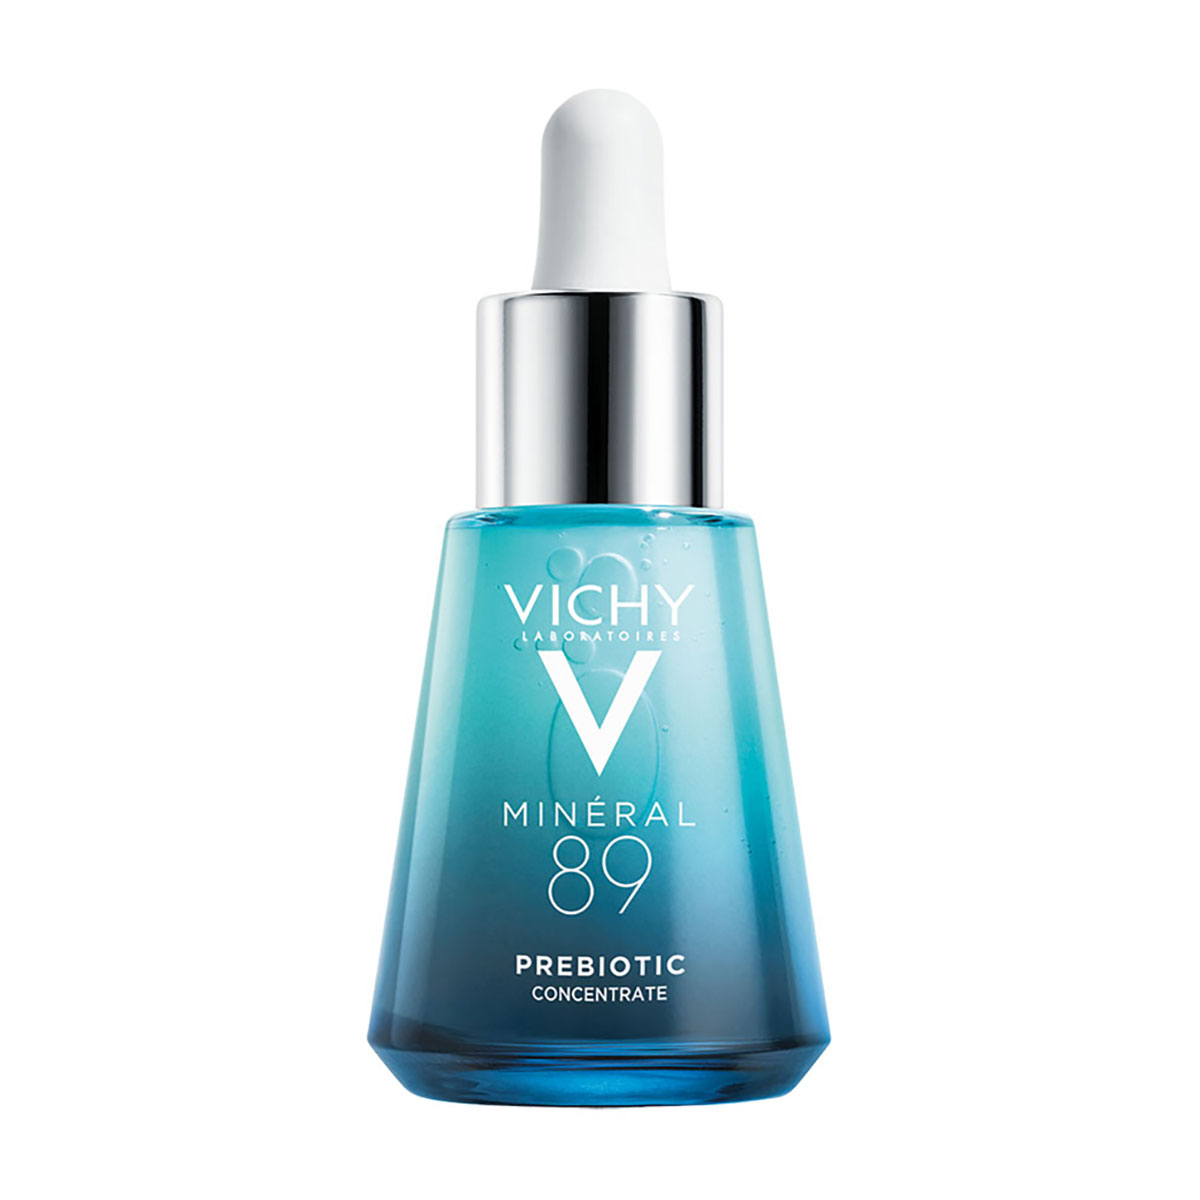 Vichy Min�ral 89 Probiotic Fractions Recovery Serum for Stressed Skin with 4% Niacinamide 30ml